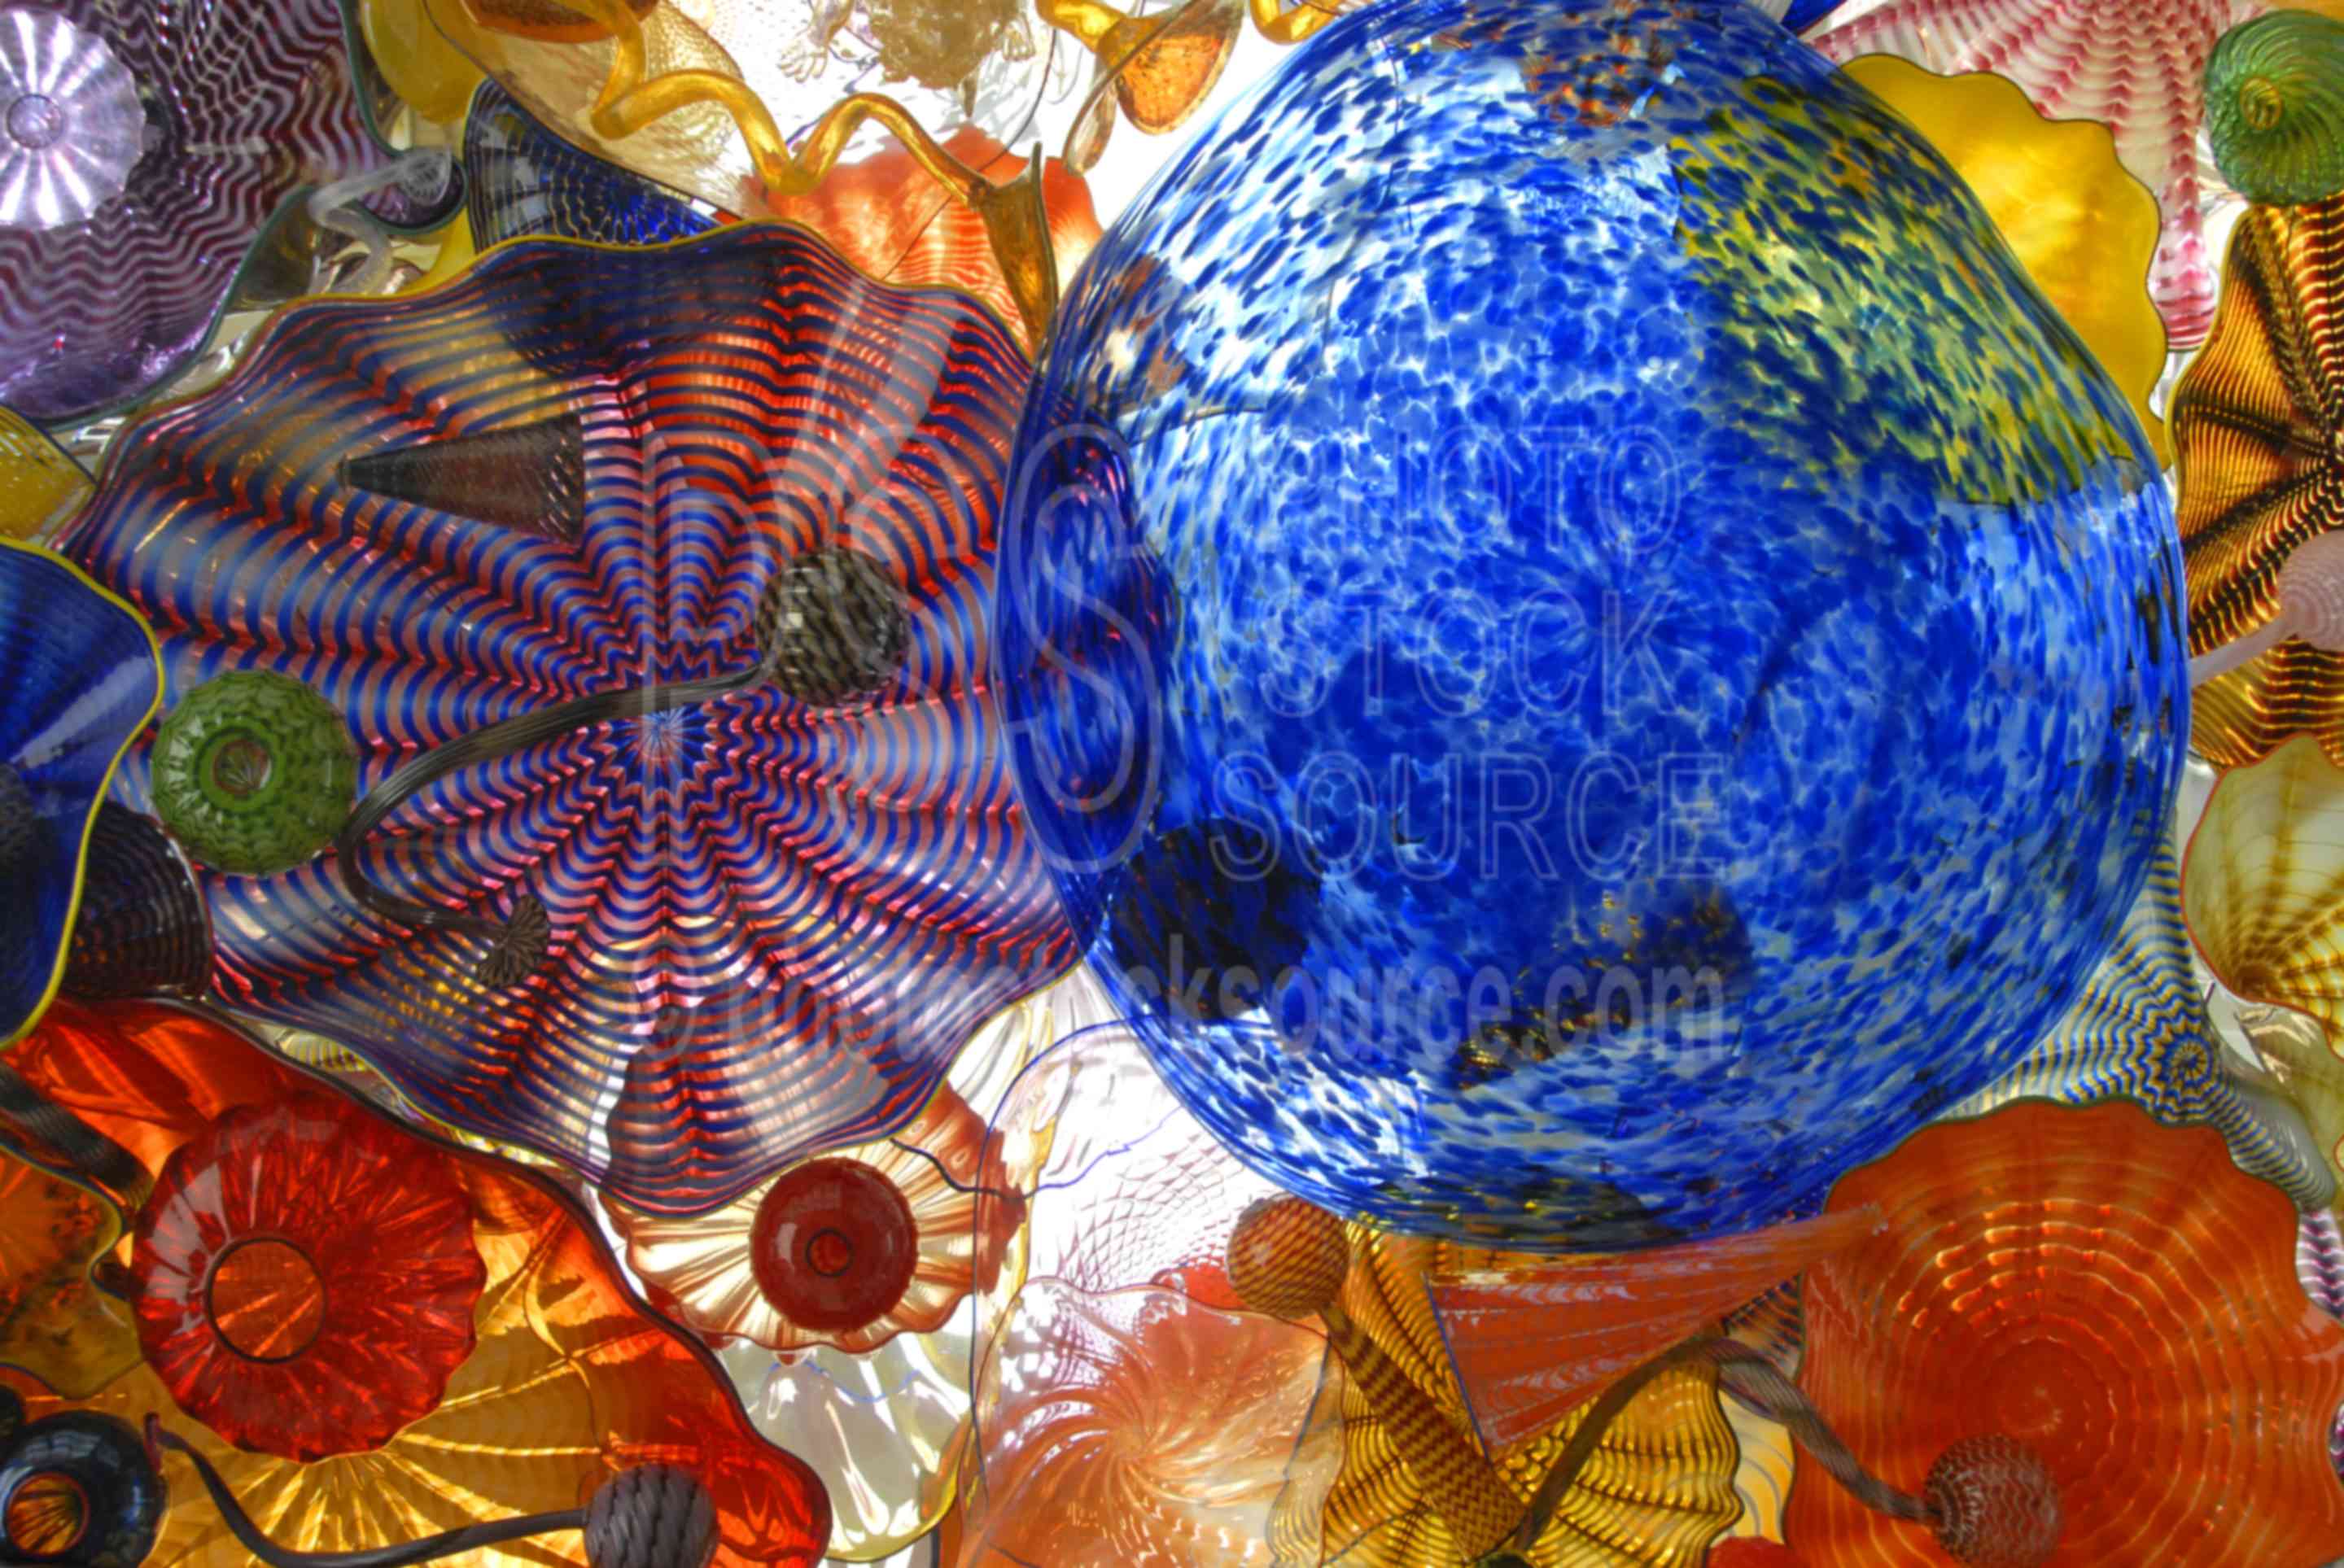 Glass Sea Forms,glass,dale chihuly,glass museum,bridge of glass,sea form pavilion,colored glass,blown glass,glass art,museums,bridges